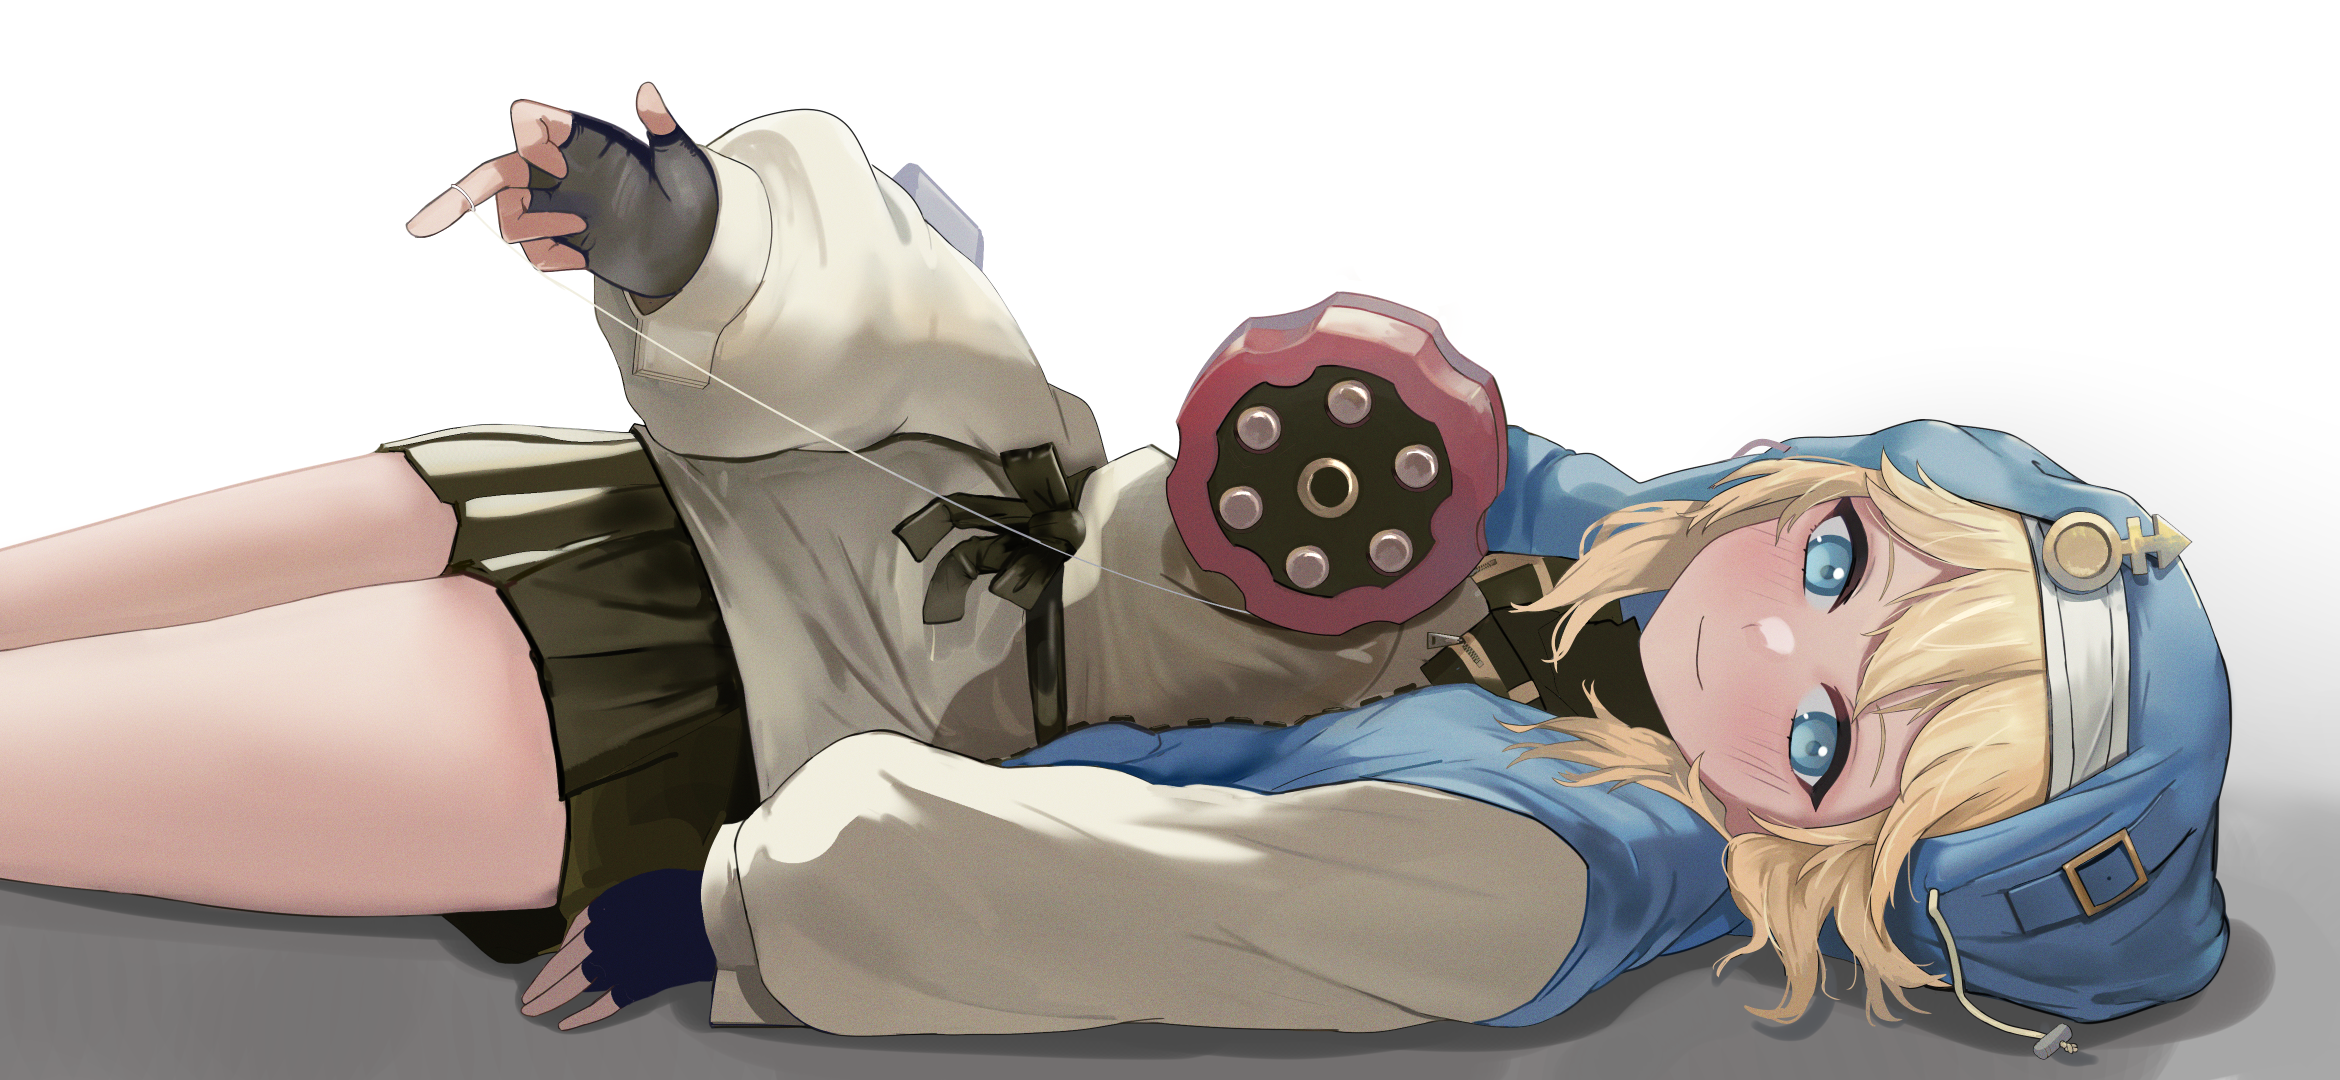 Anime 2340x1080 Bridget (guilty gear) blonde Guilty Gear blue eyes lying on back video games video game characters anime men